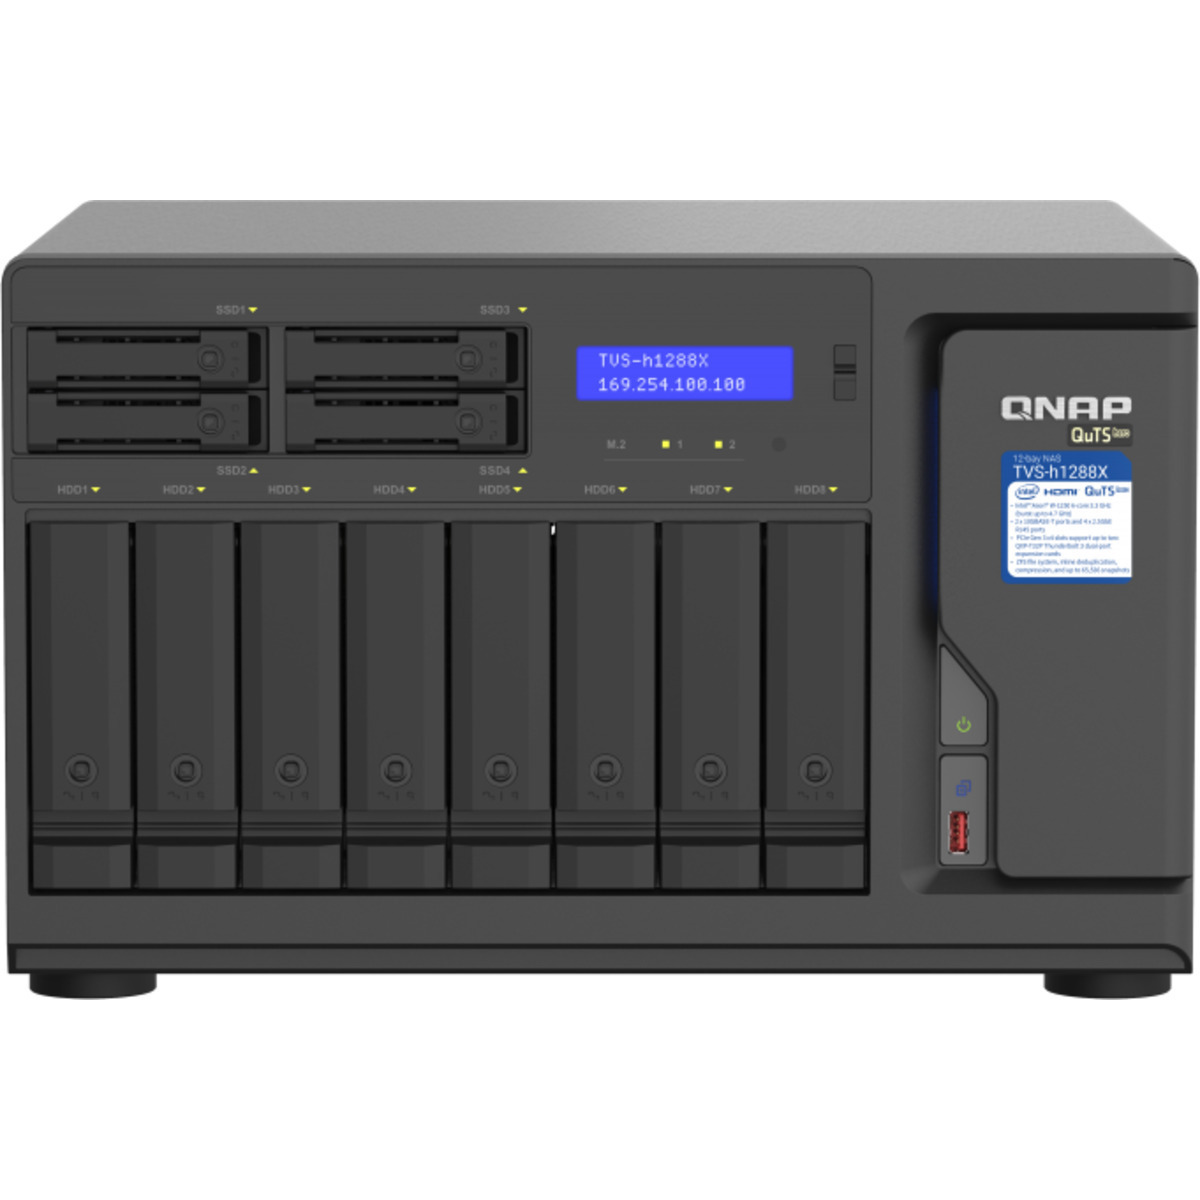 QNAP TVS-h1288X QuTS hero NAS 56tb 8+4-Bay Desktop Multimedia / Power User / Business NAS - Network Attached Storage Device 7x8tb Western Digital Red Pro WD8003FFBX 3.5 7200rpm SATA 6Gb/s HDD NAS Class Drives Installed - Burn-In Tested TVS-h1288X QuTS hero NAS